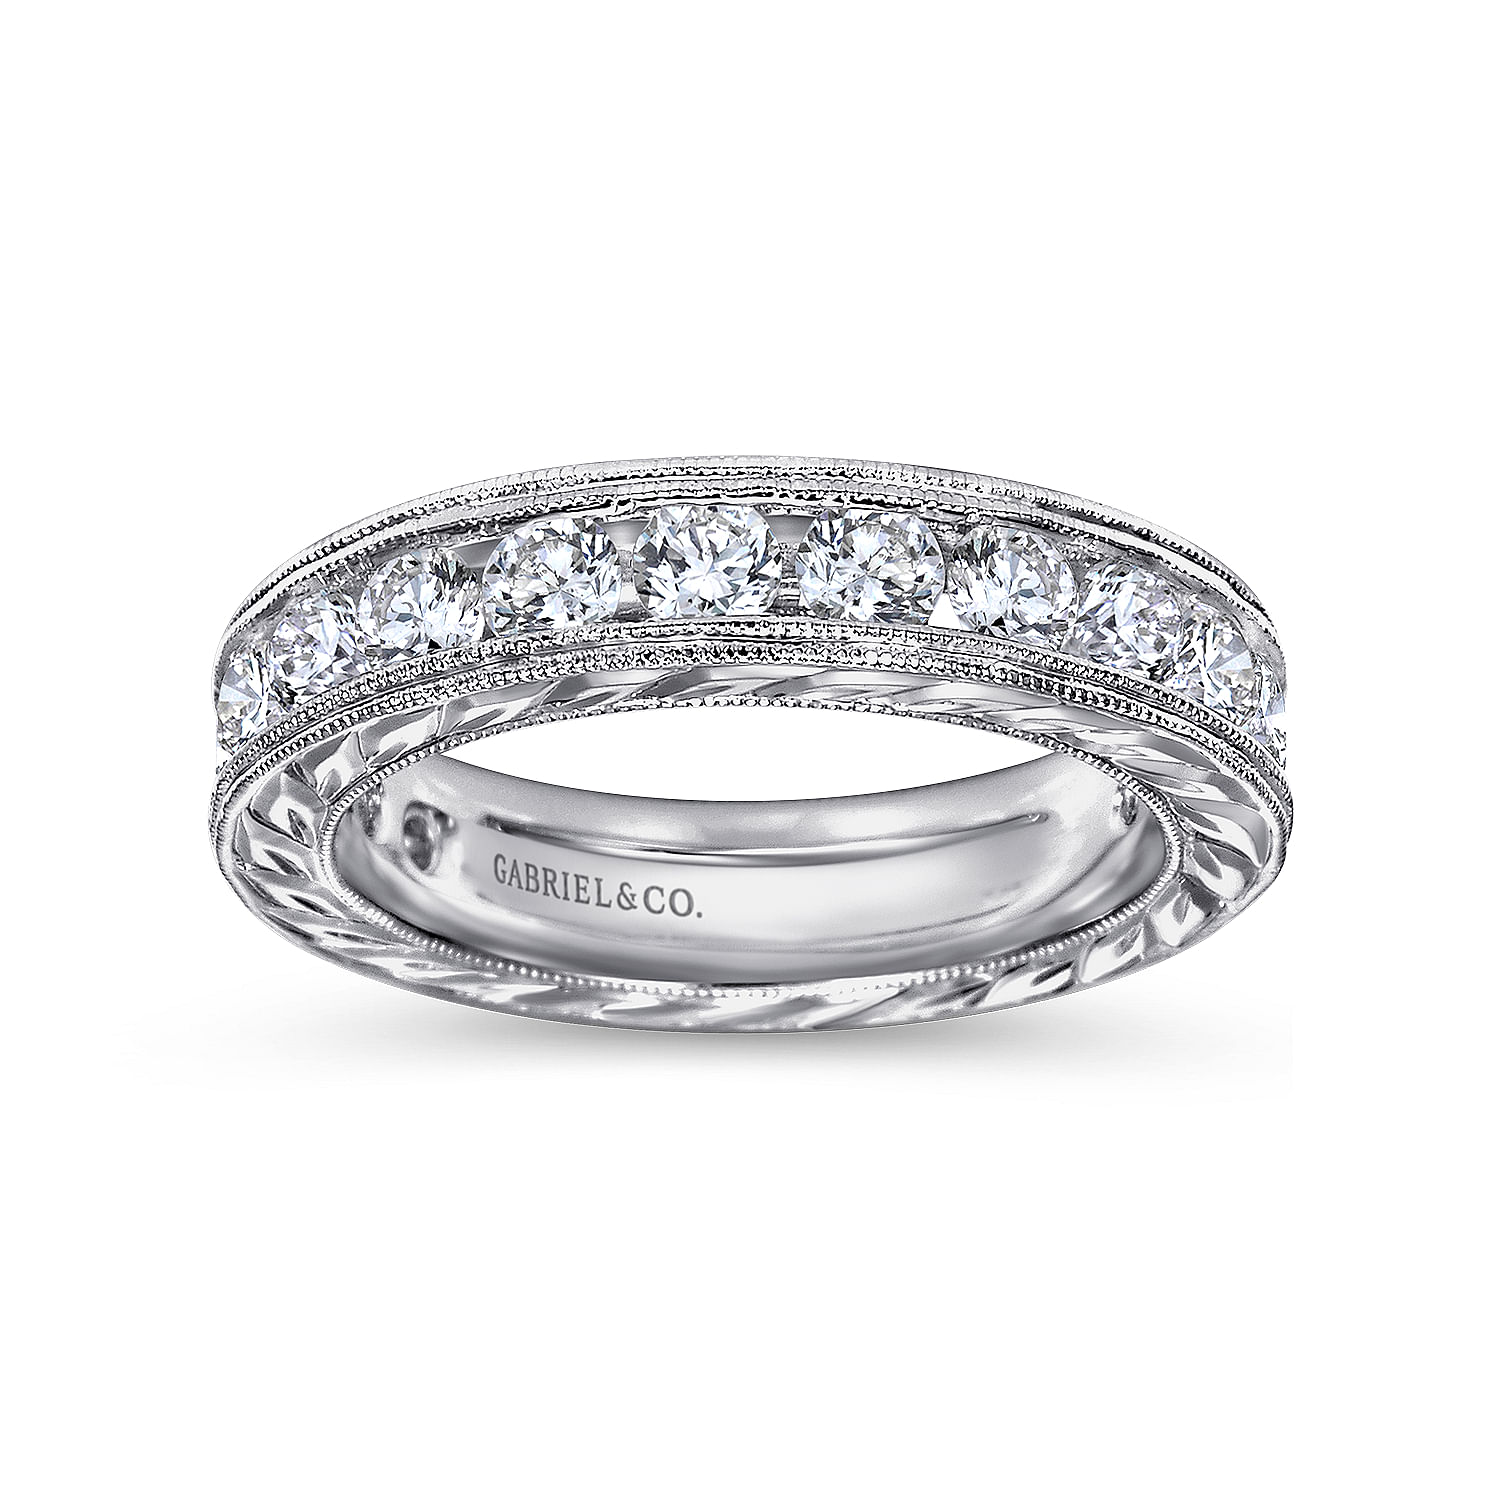 Vintage Inspired 14K White Gold Channel Set Diamond Eternity Band with Engraving